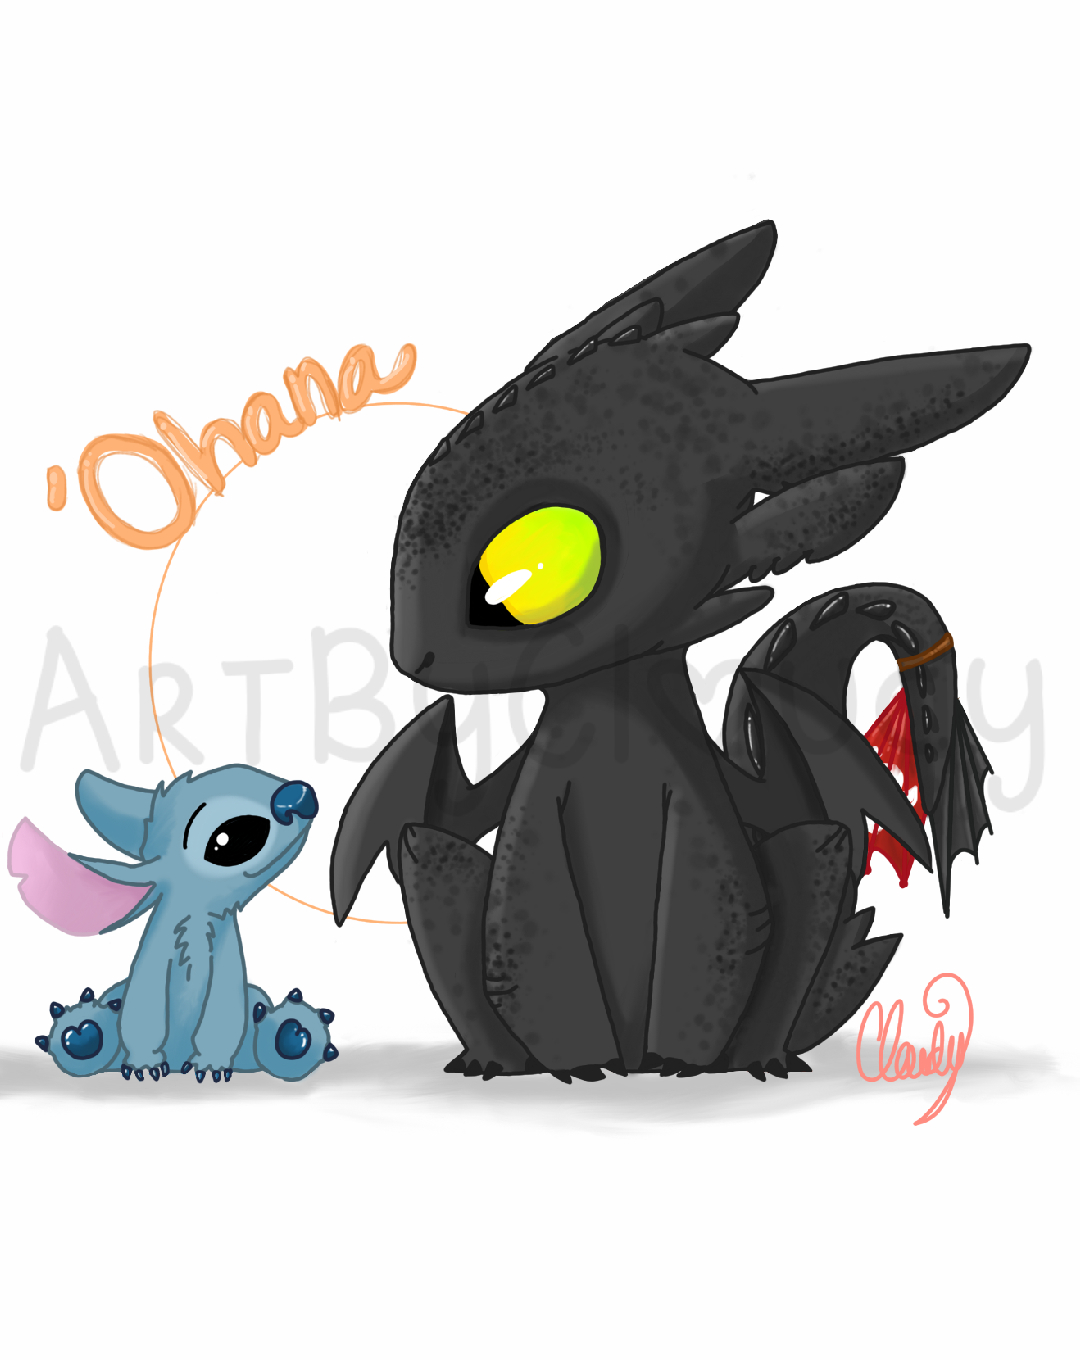 stitch and toothless by emochicklette04 on